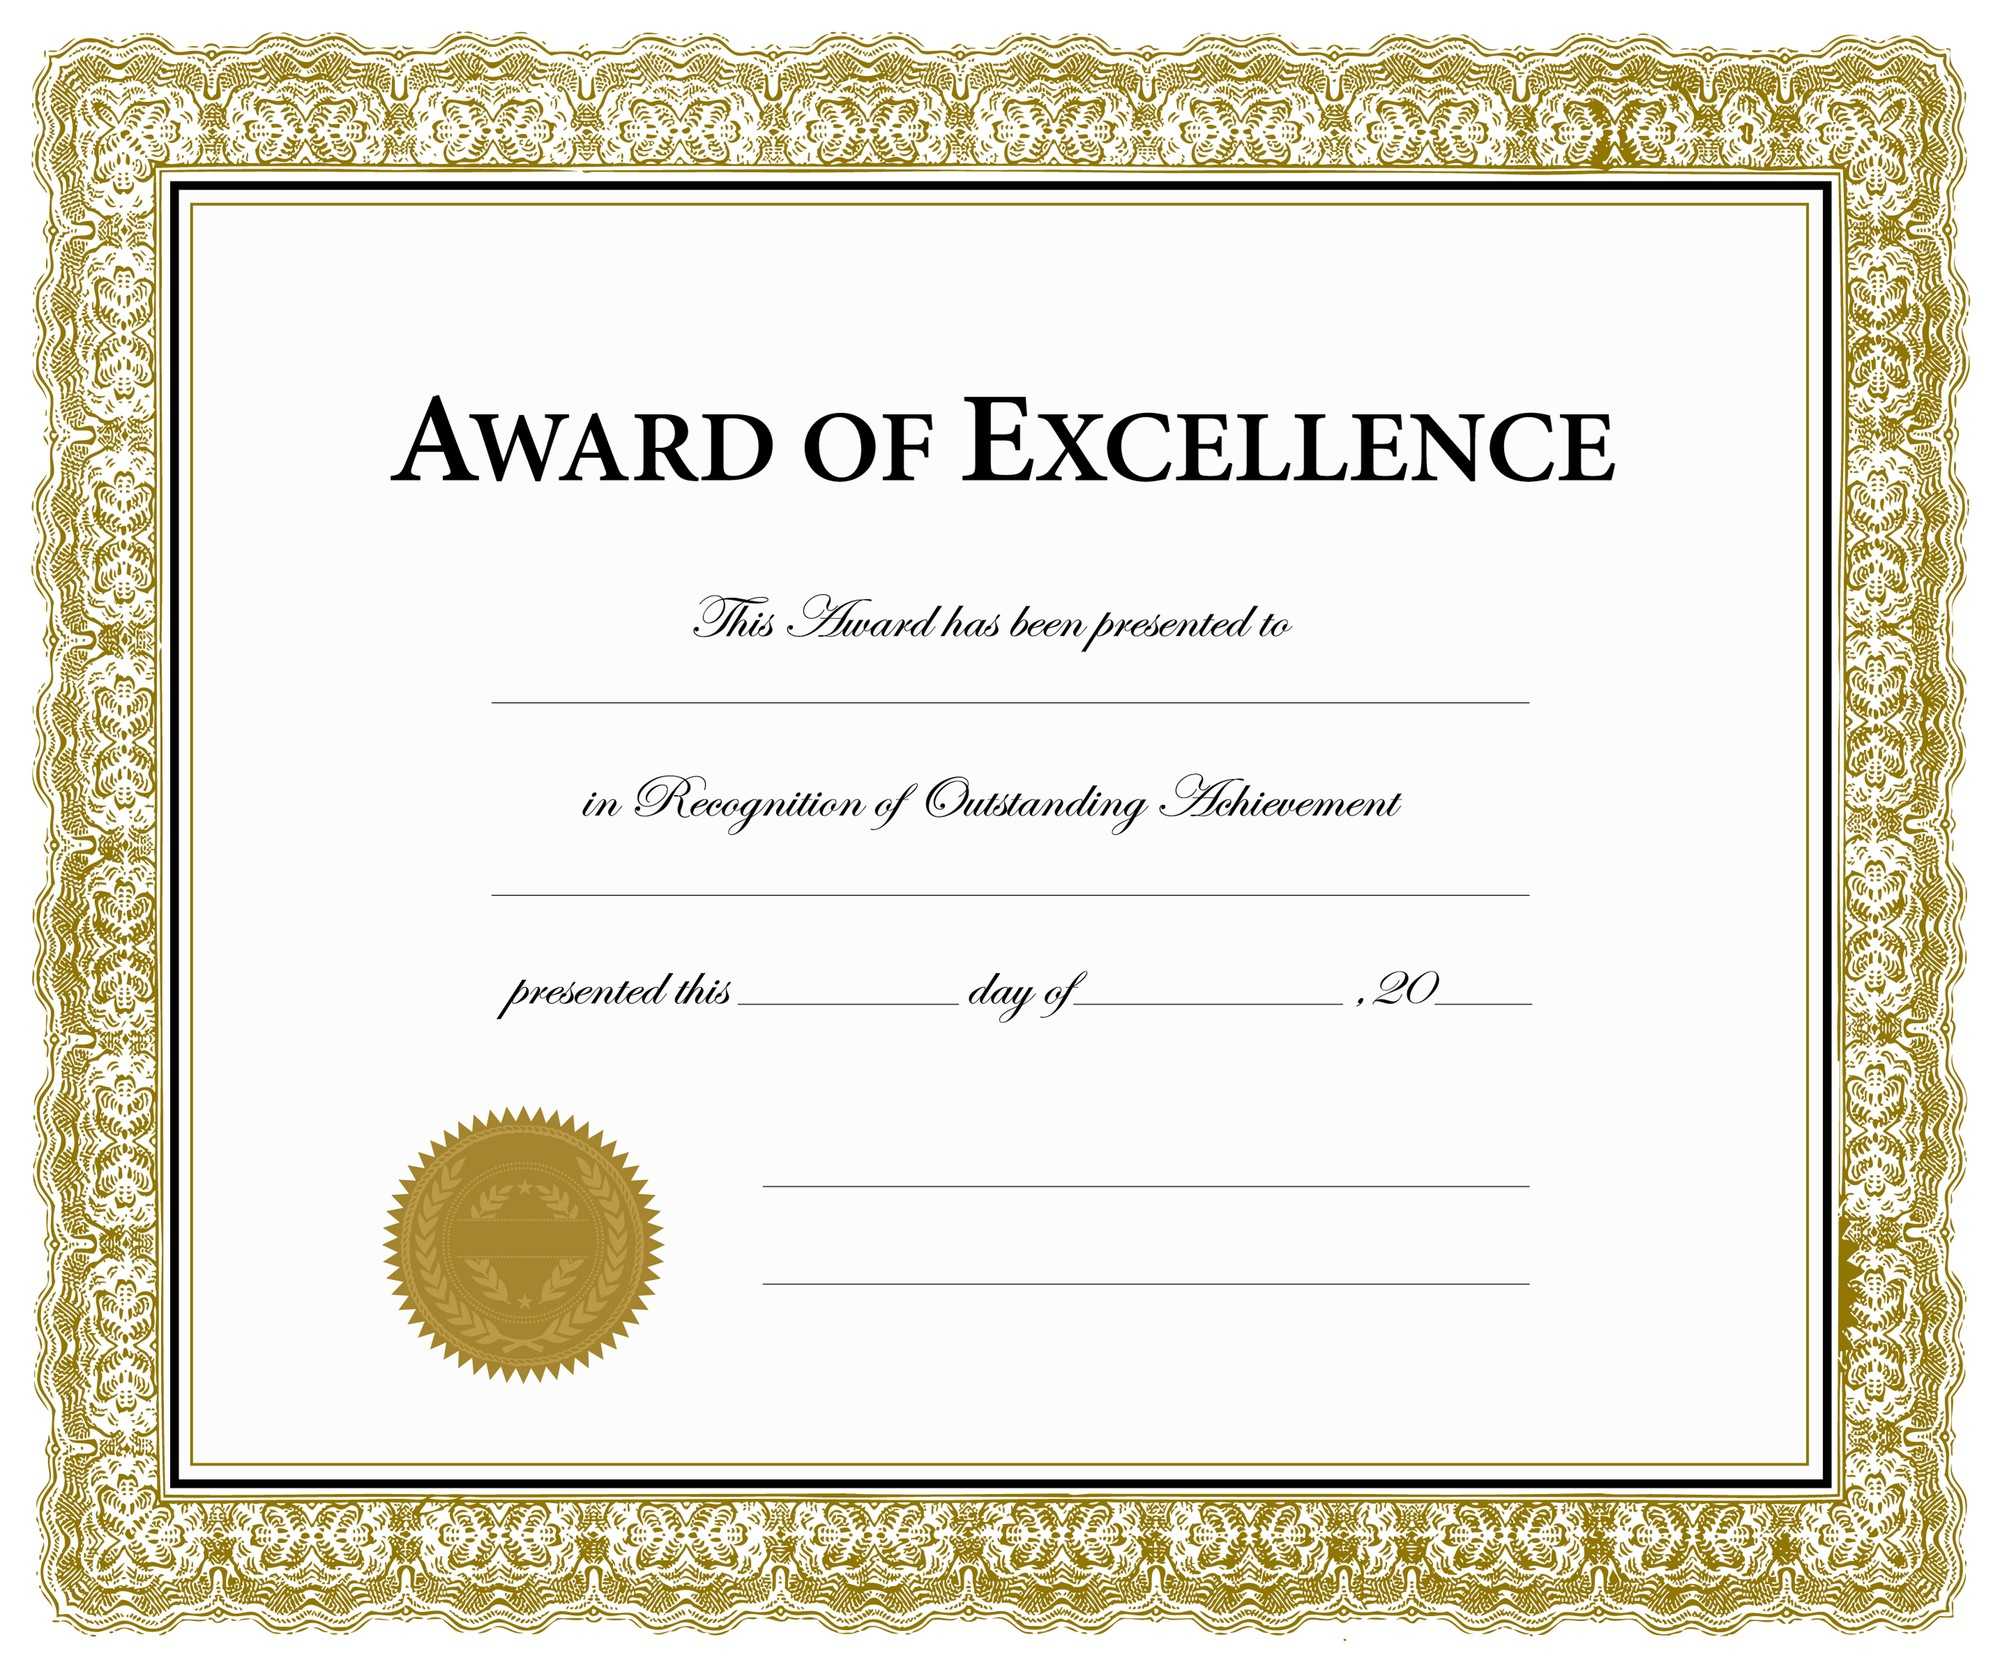 Certificates. Charming Award Of Excellence Certificate Throughout Award Of Excellence Certificate Template